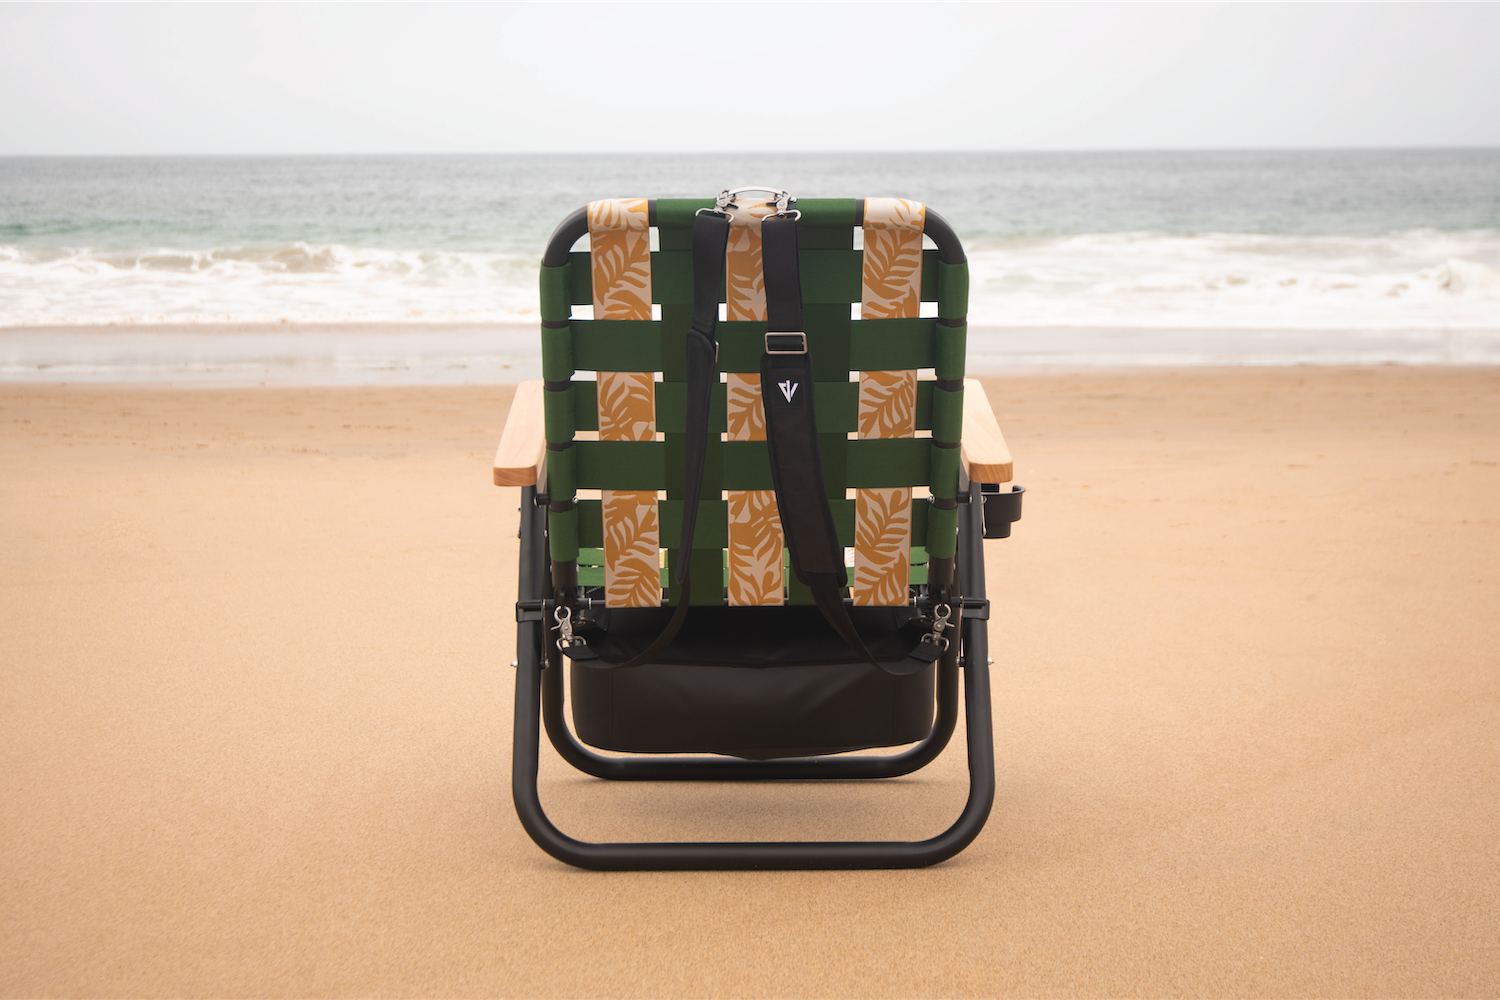 Parkit Voyager Chair in tropic on a beach in california.